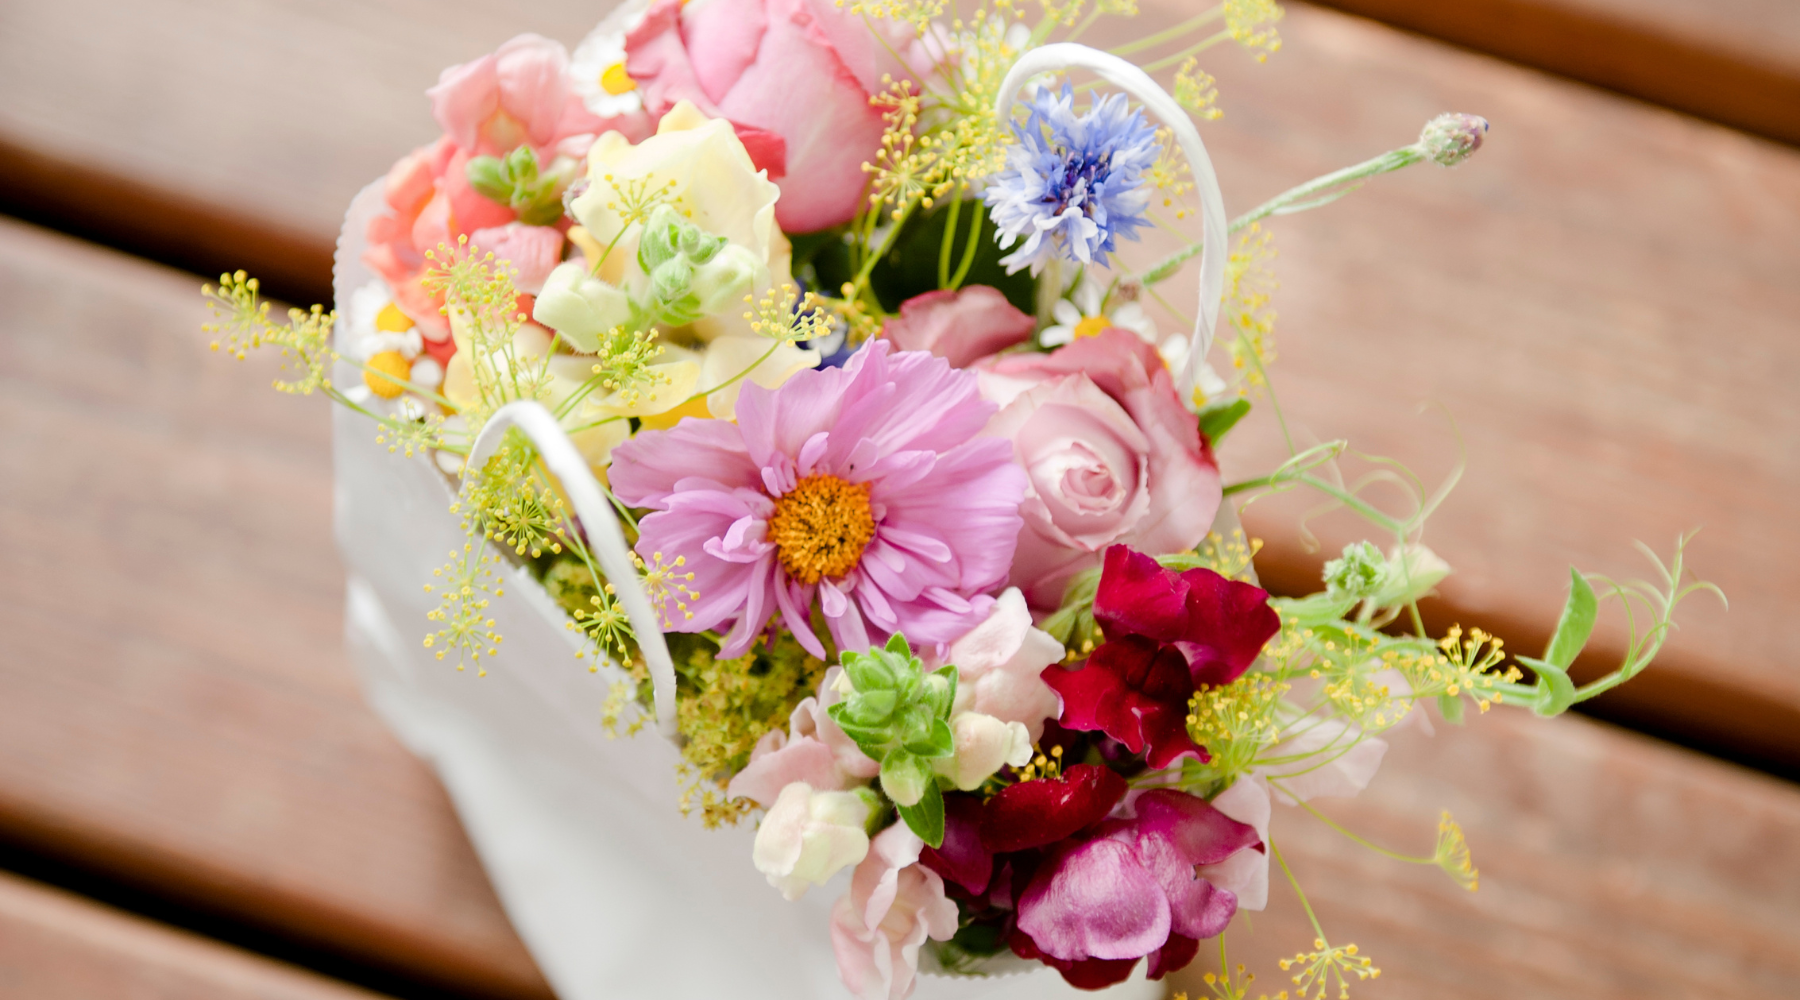 Image of multicoloured blooms in a white basket on a brown wood floor